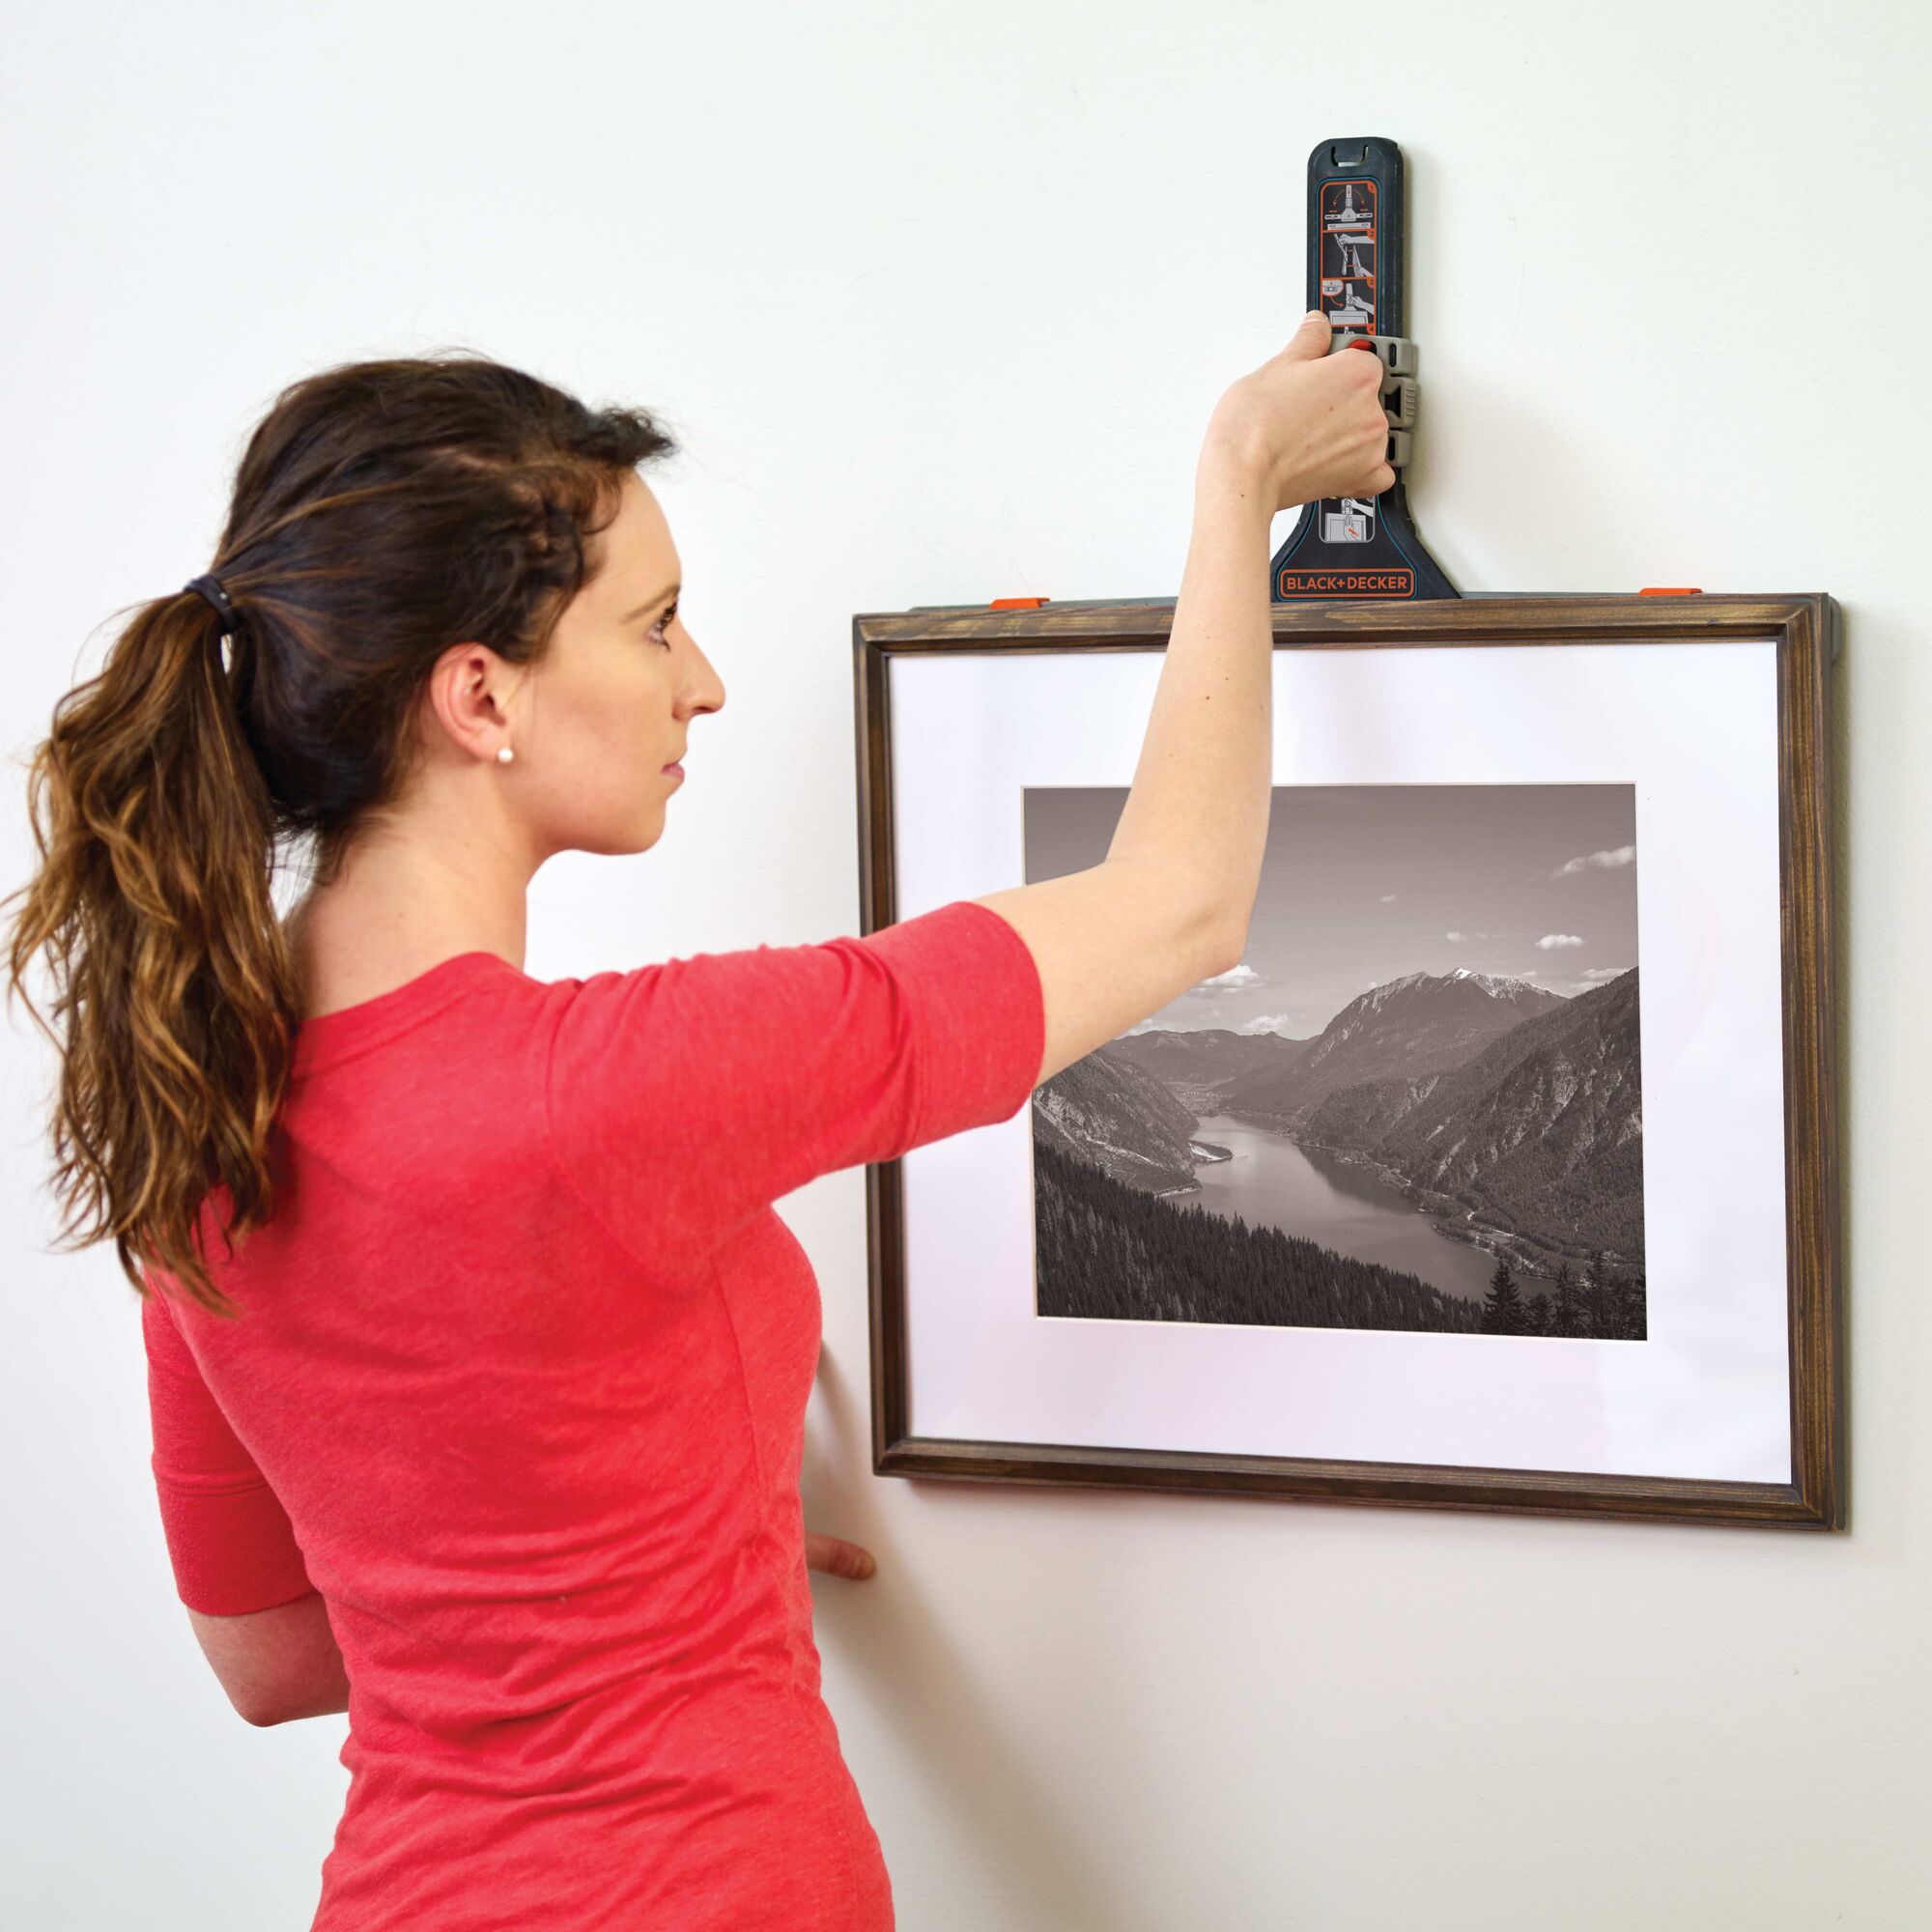 MarkIT picture hanging tool being used by a person to hang a frame.